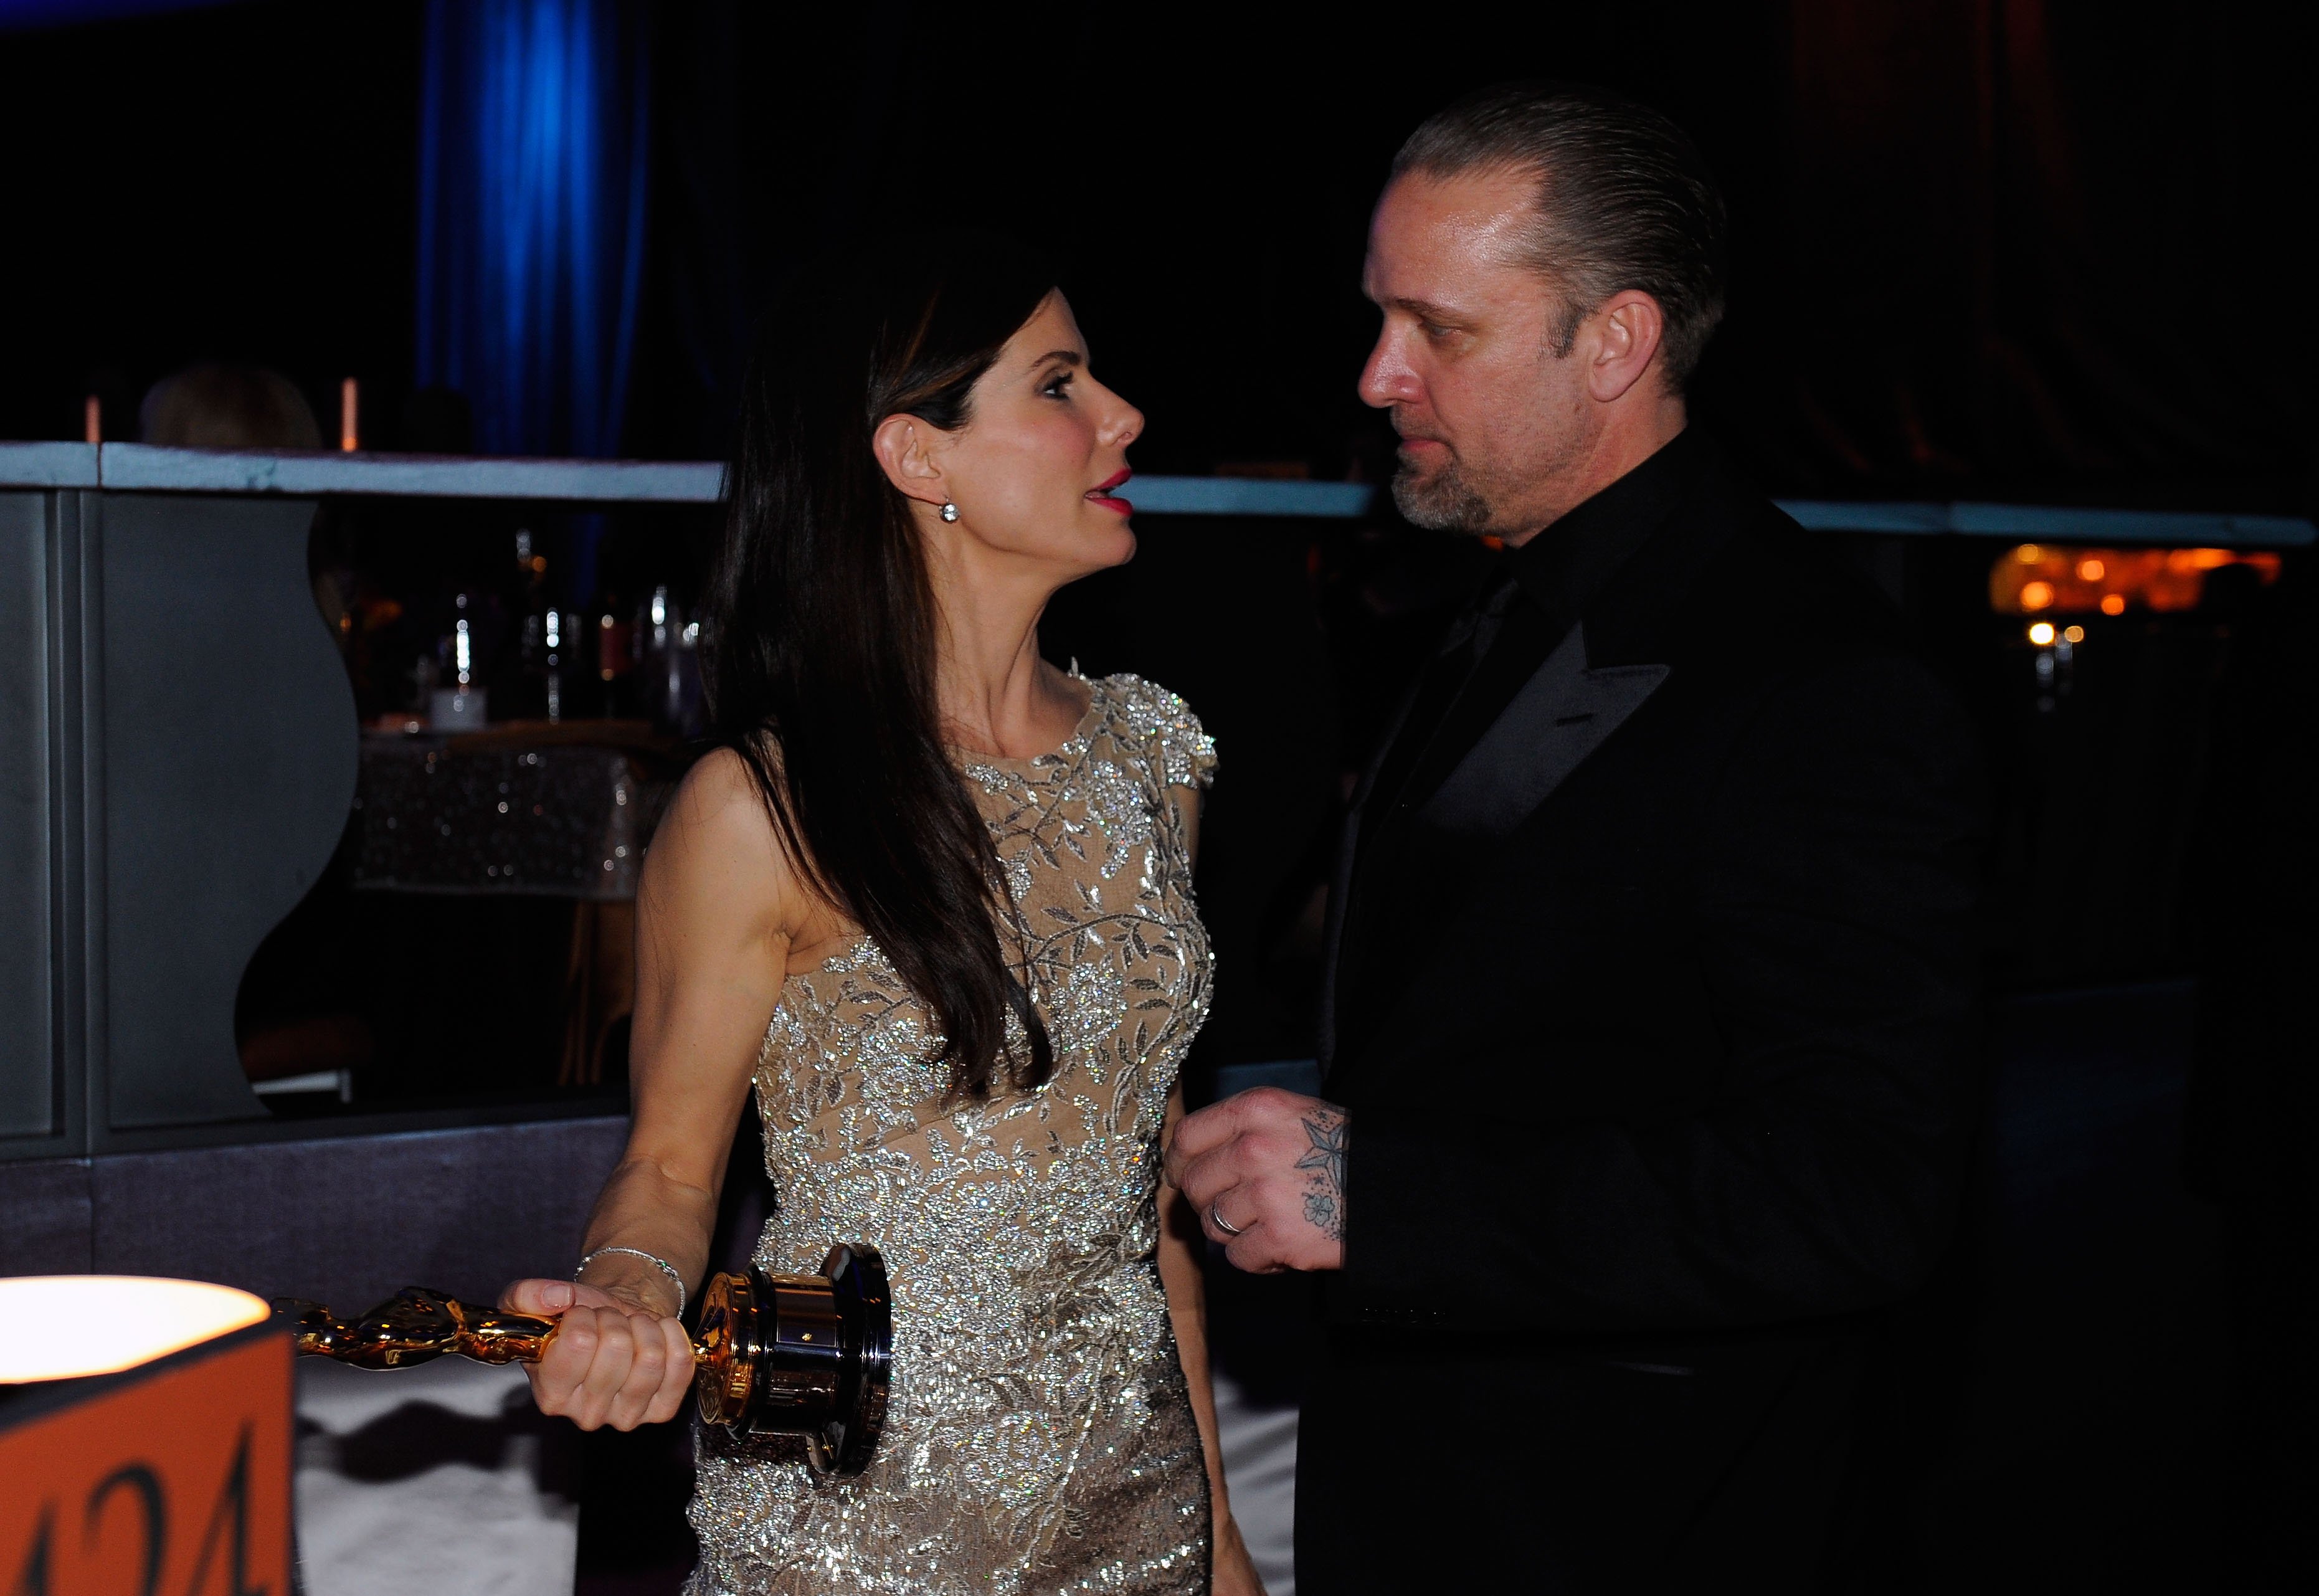 Sandra Bullock, winner Best Actress award for the film "The Blind Side," pictured with Jesse James during the 82nd Annual Academy Awards Governor's Ball at Kodak Theatre on March 7, 2010 in Hollywood, California. | Source: Getty Images